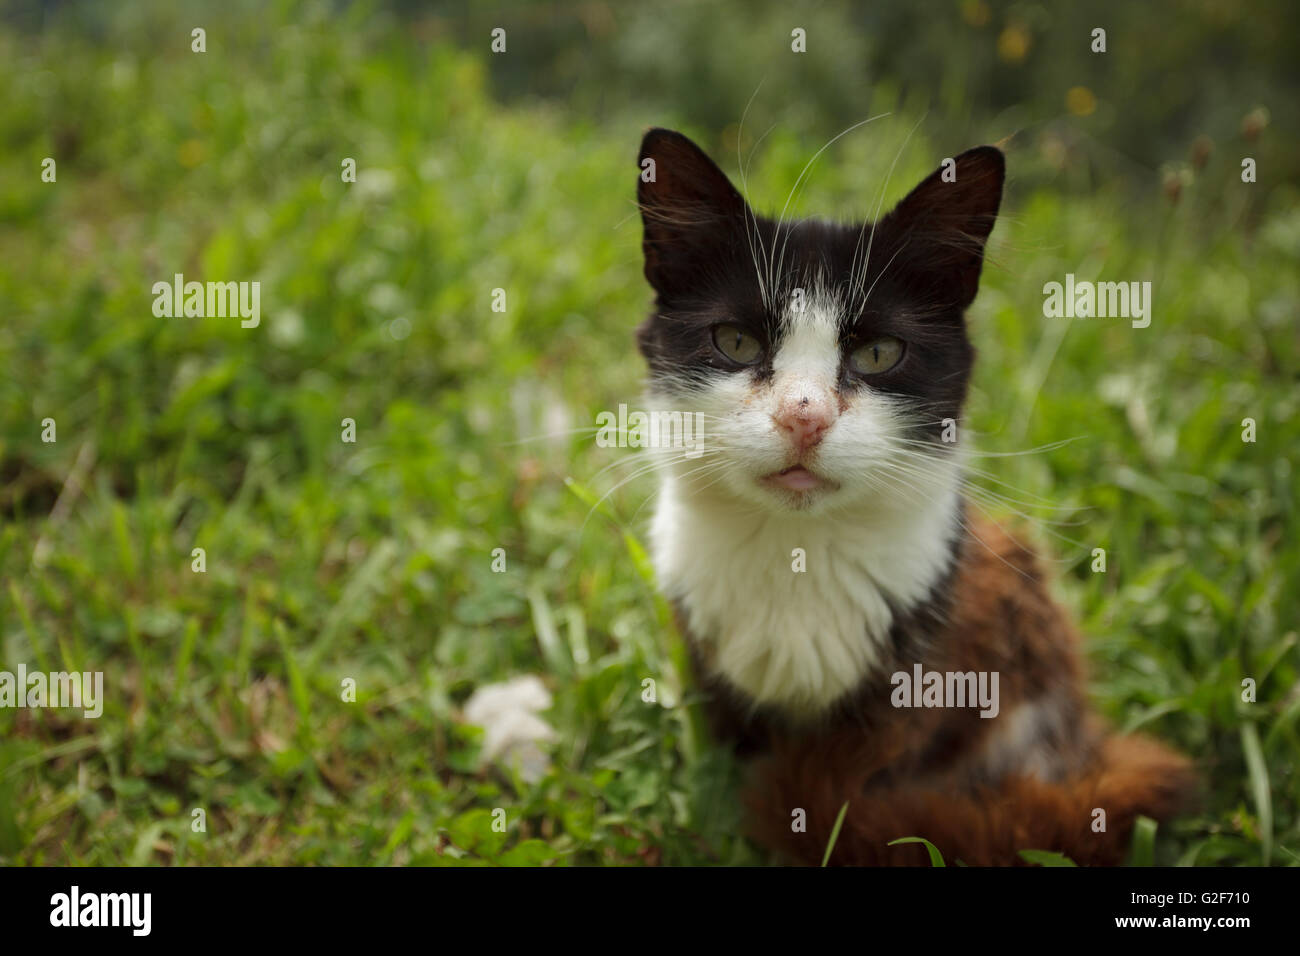 Housecat in Summer outside in the green Grass Stock Photo